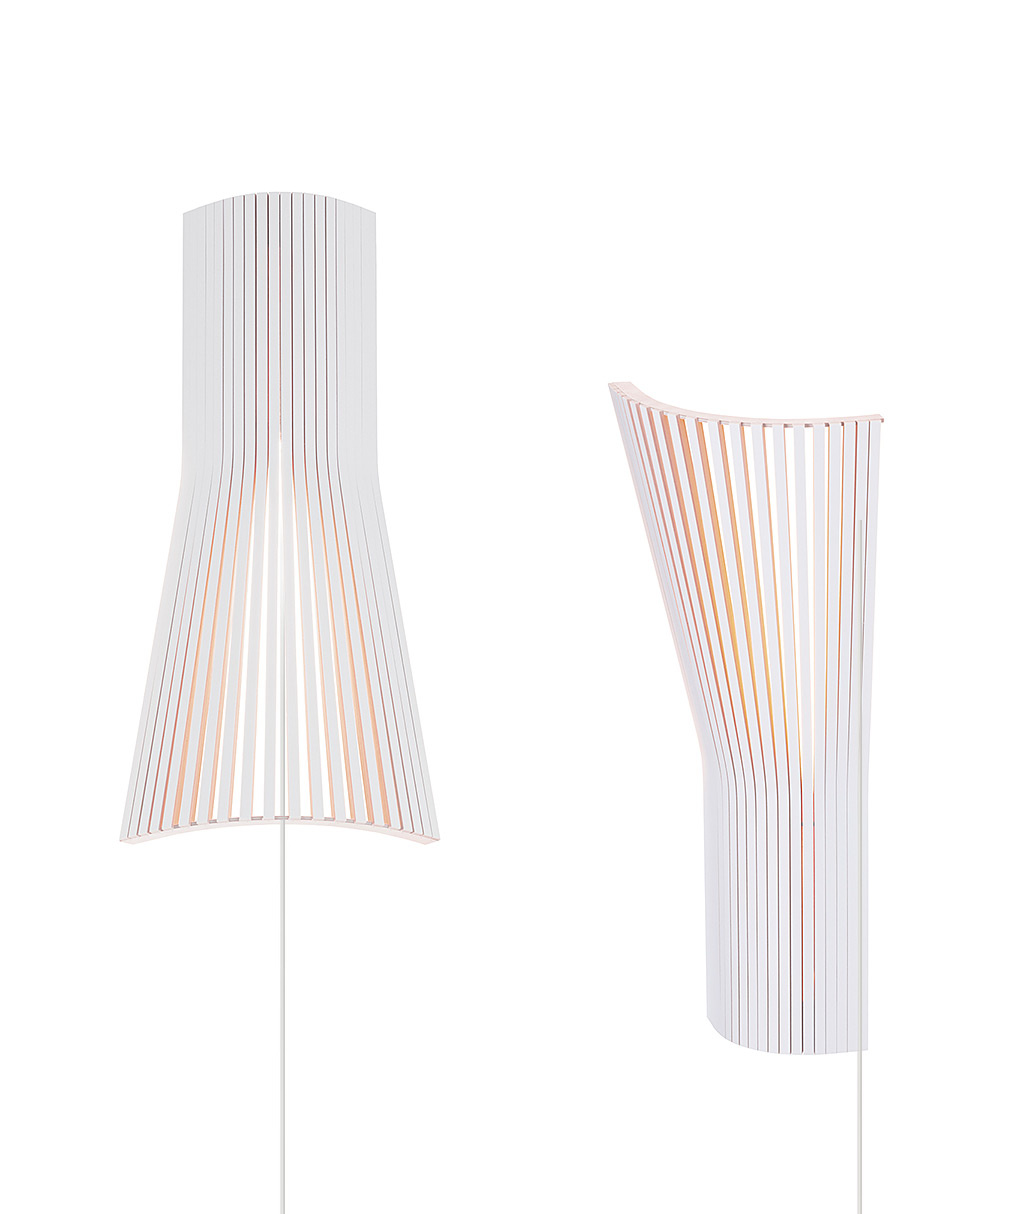 Secto Small 4237 corner lamp is available in white laminated